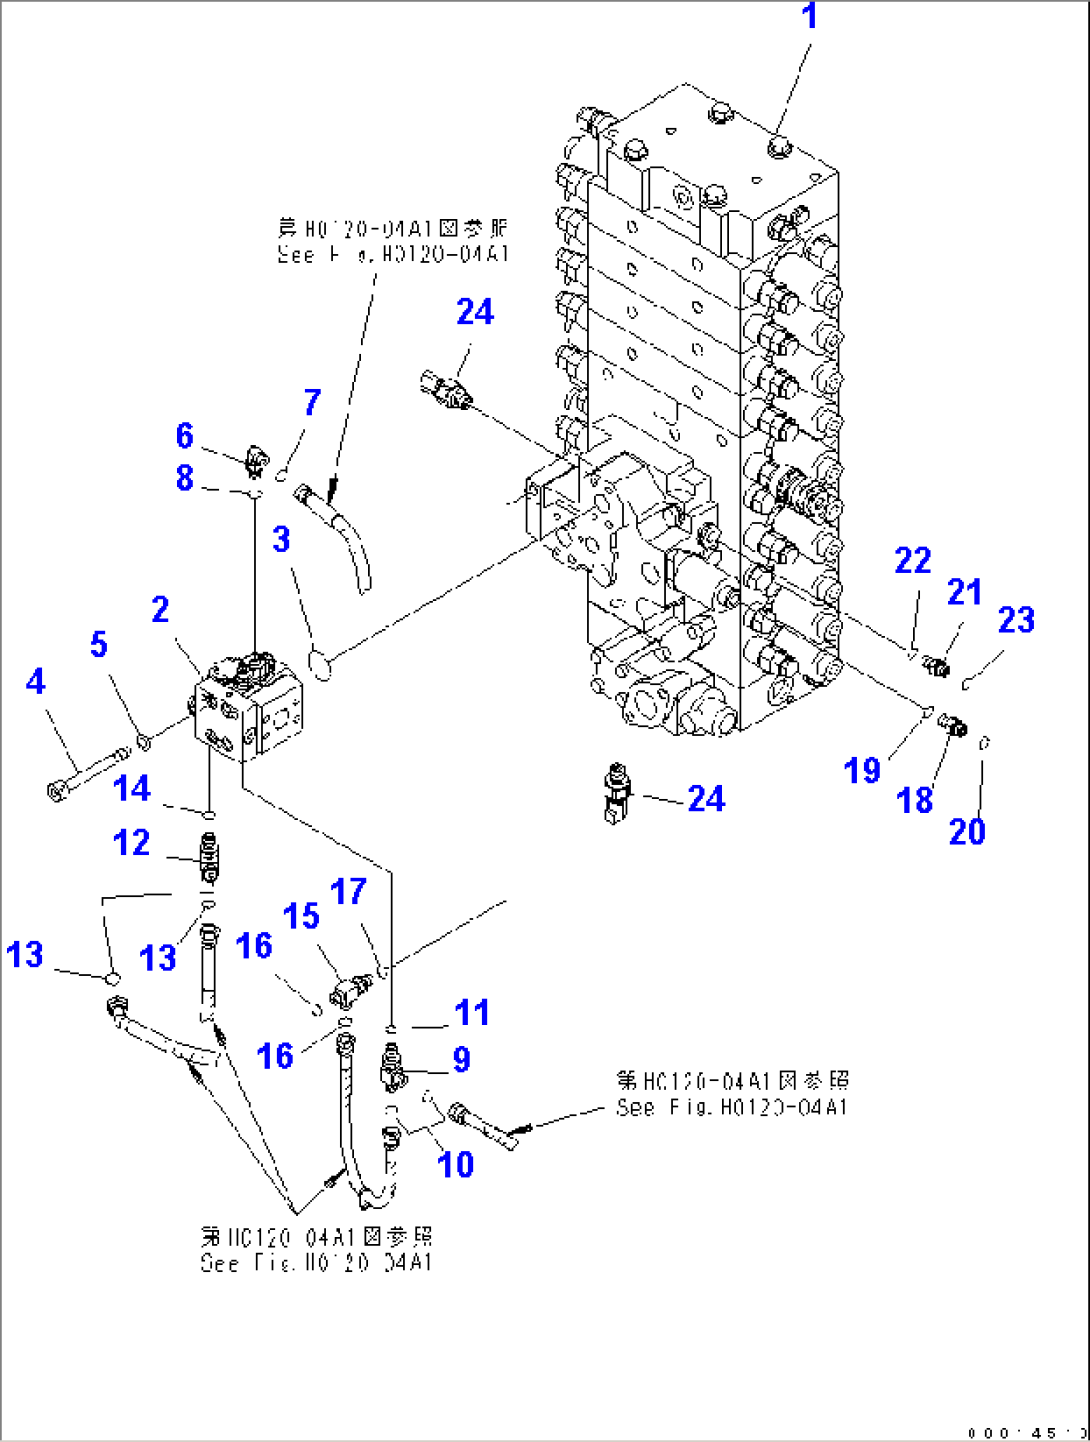 MAIN VALVE (REDUCING VALVE AND CONNECTING PARTS) (2 ACTUATOR)